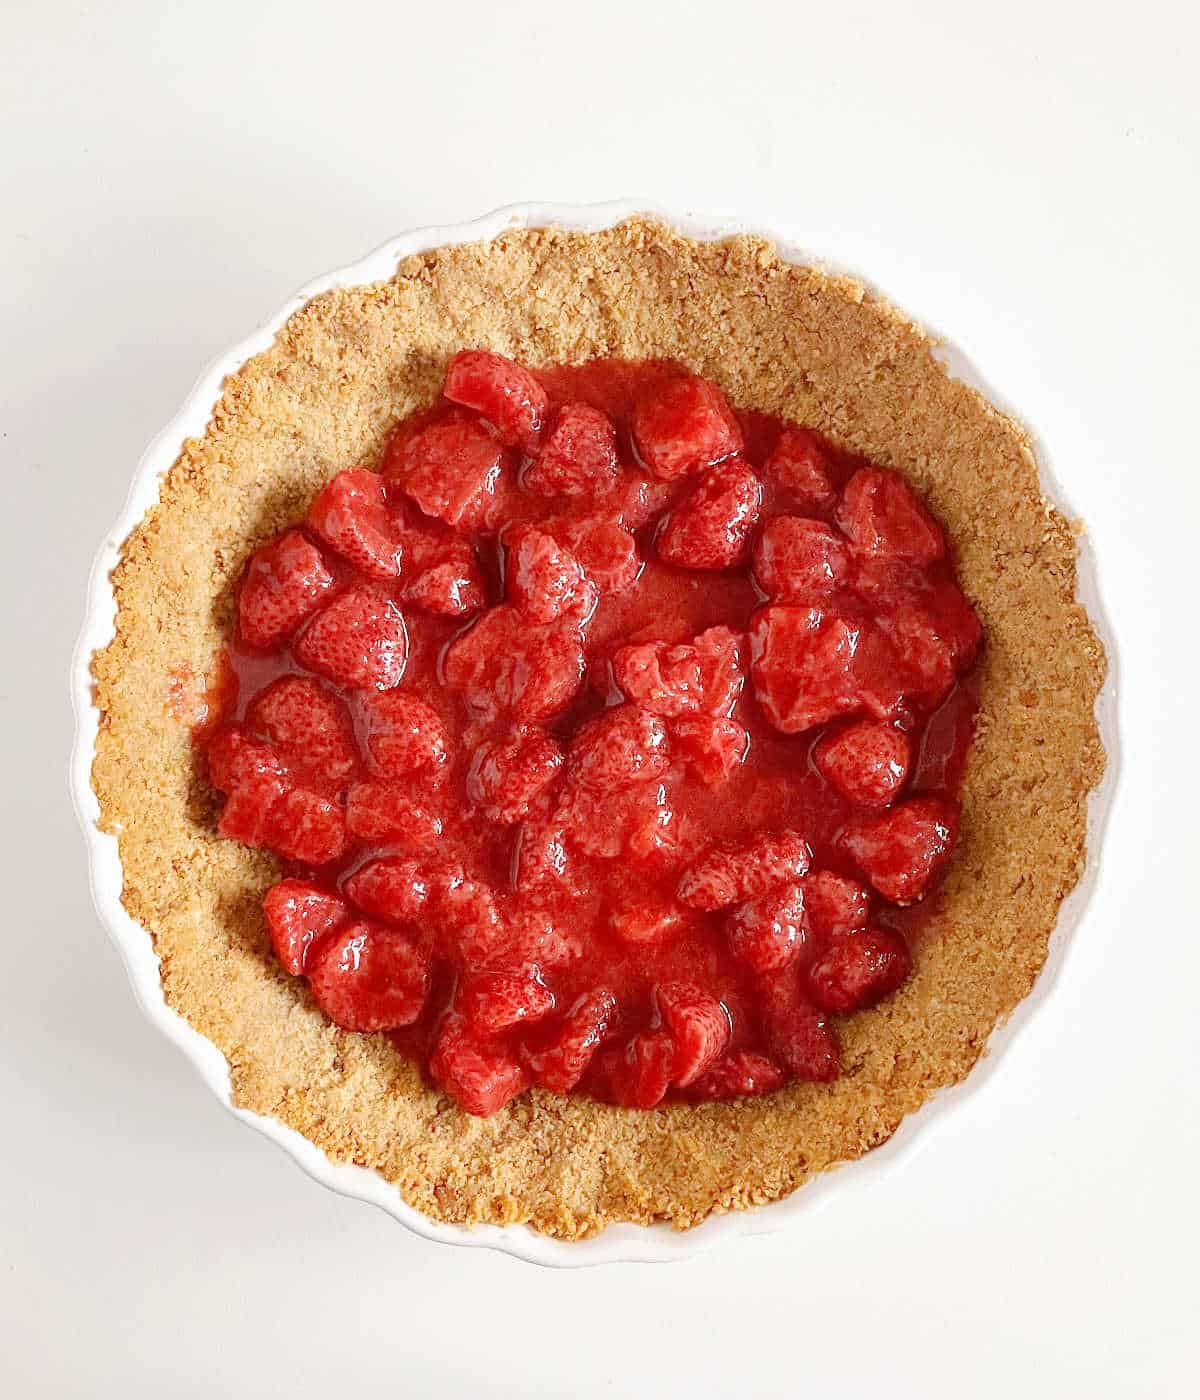 Top view of strawberry pie filling in a graham cracker crust on a white surface.